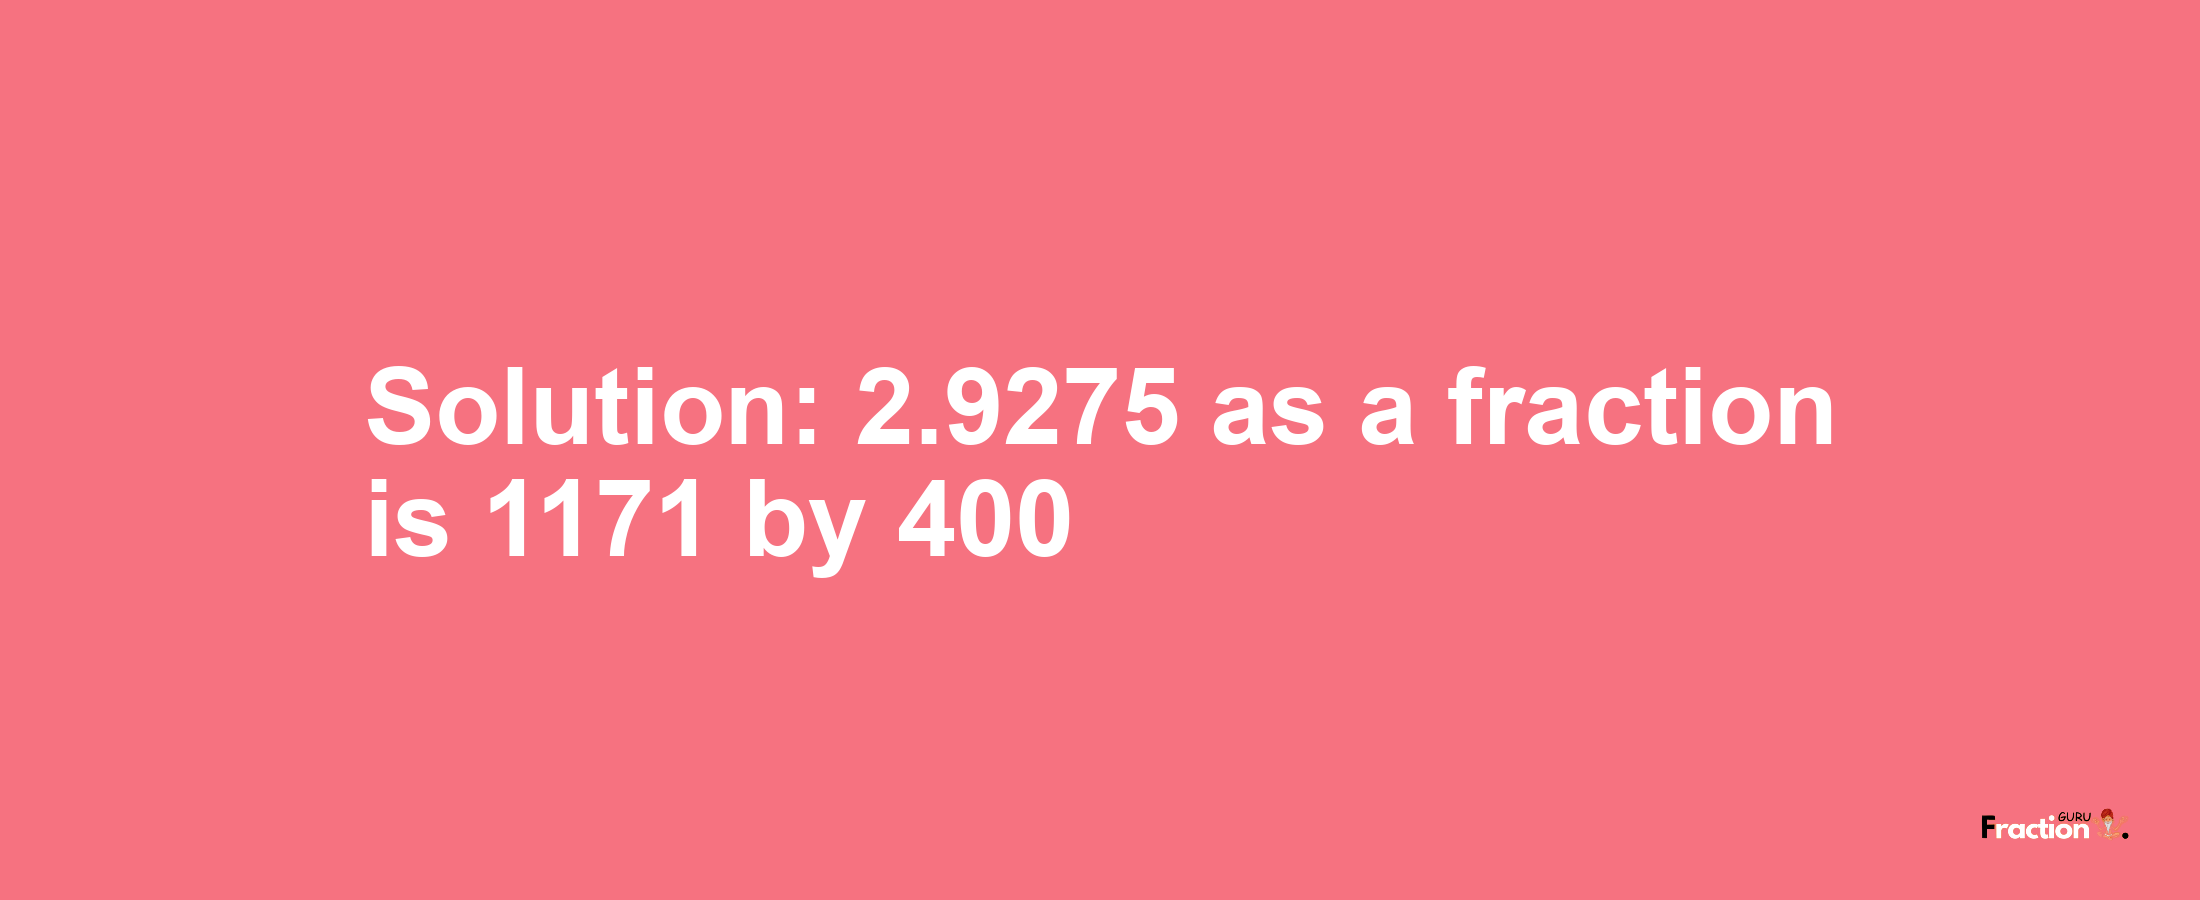 Solution:2.9275 as a fraction is 1171/400